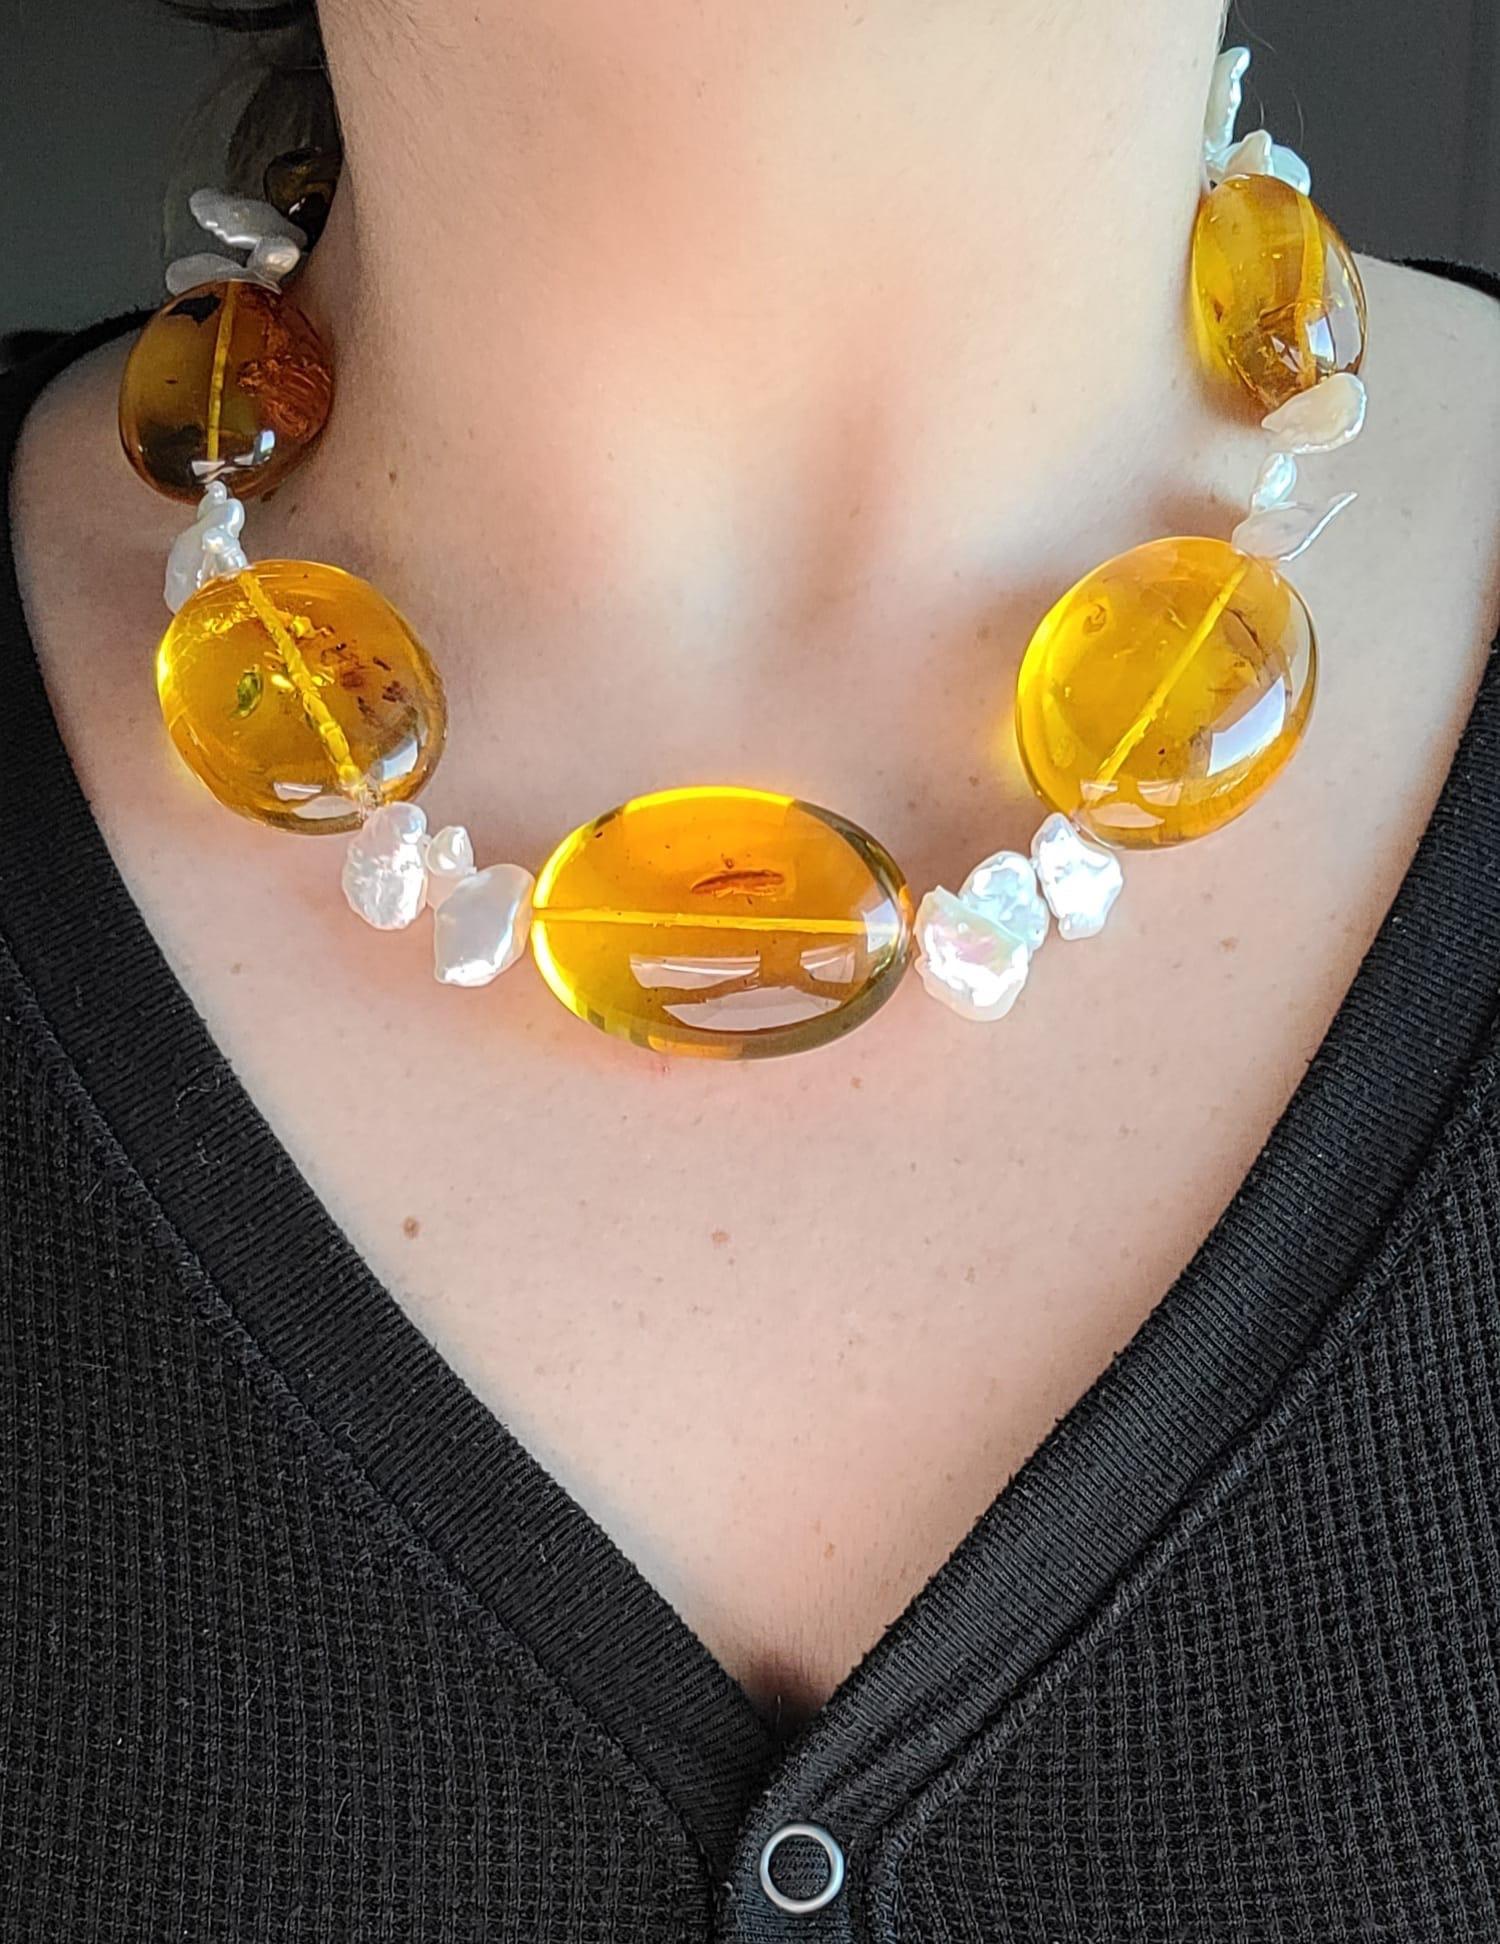  A True One-of-a-Kind Gem

Prepare to be captivated by the unparalleled beauty of this unique necklace. Meticulously crafted, it combines the ethereal allure of fine, transparent Baltic Amber, adorned with distinctive inclusions that tell a story of